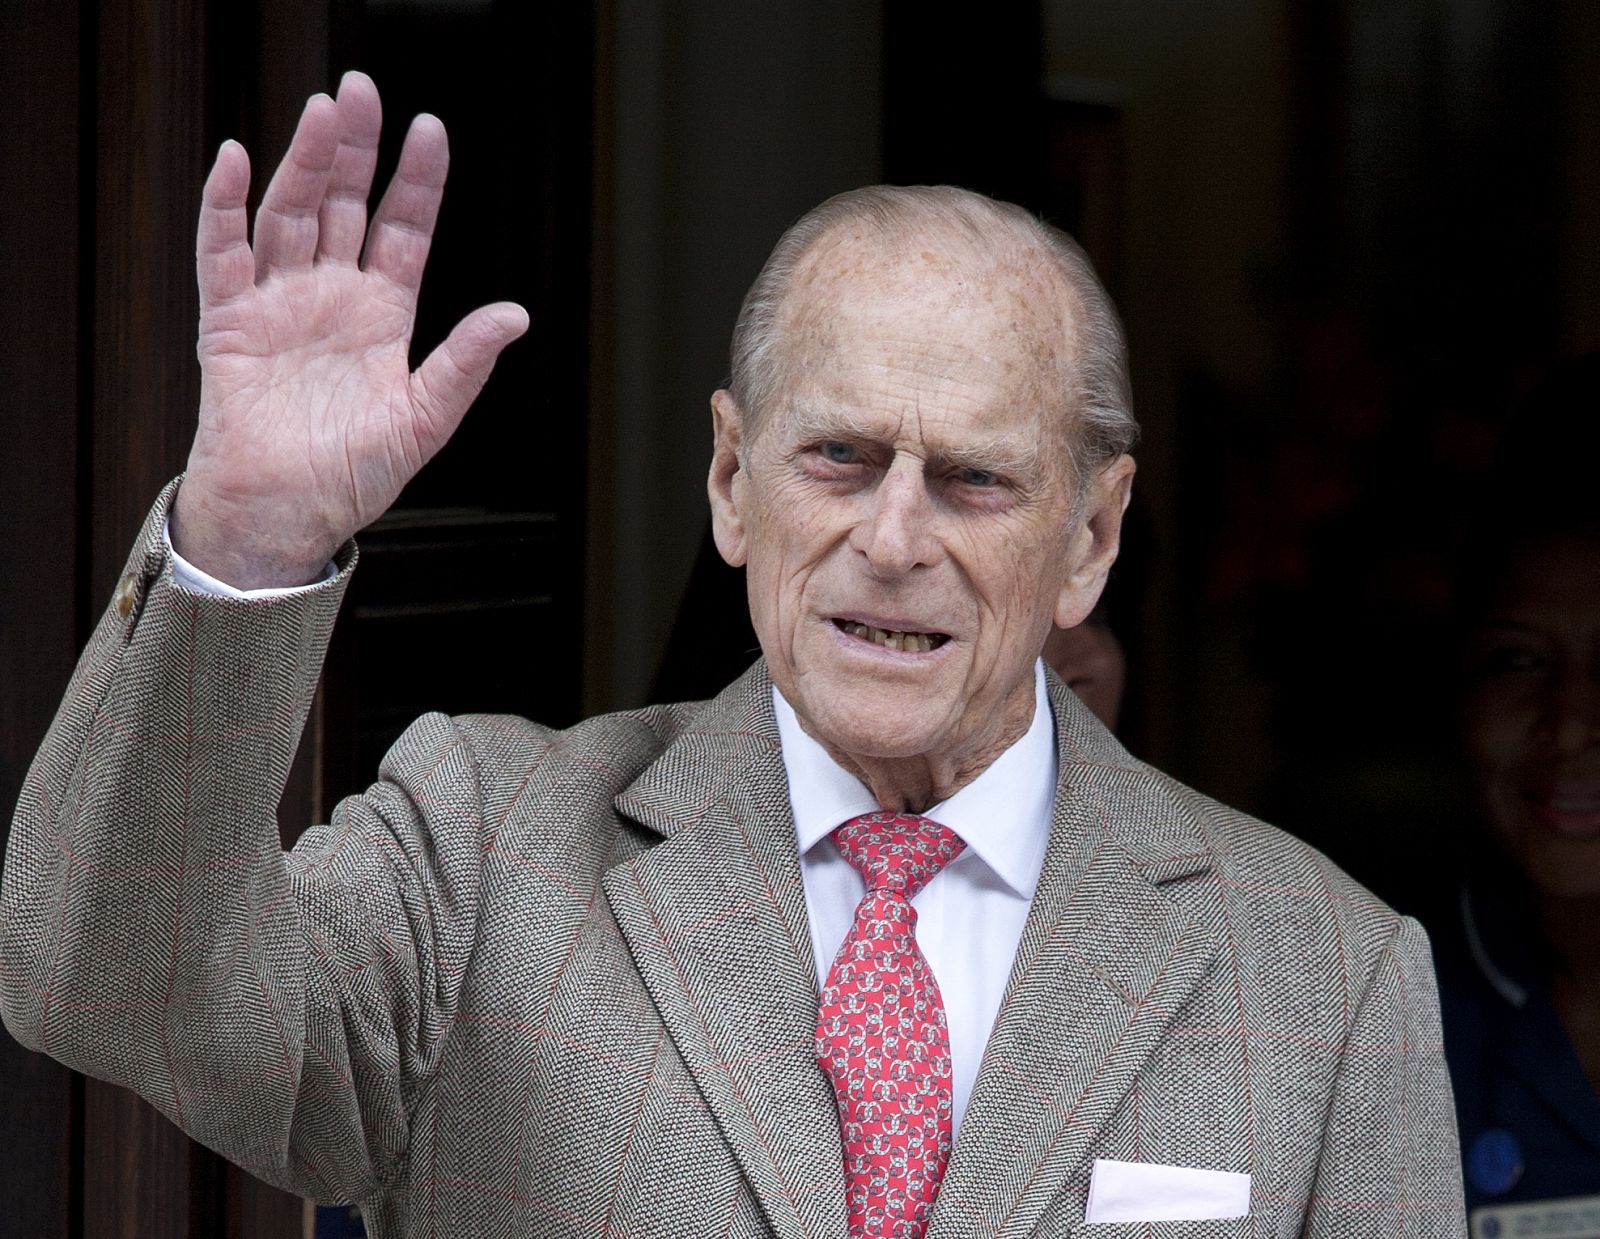 epa09123930 (FILE) Britain's Prince Philip, the Duke of Edinburgh waves as he is discharged from the King Edward VII hospital in central London, Britain, 09 June 2012  . According to Royal Family, Prince Philip has died aged 99 on 09 April 2021.  EPA/KAREL PRINSLOO